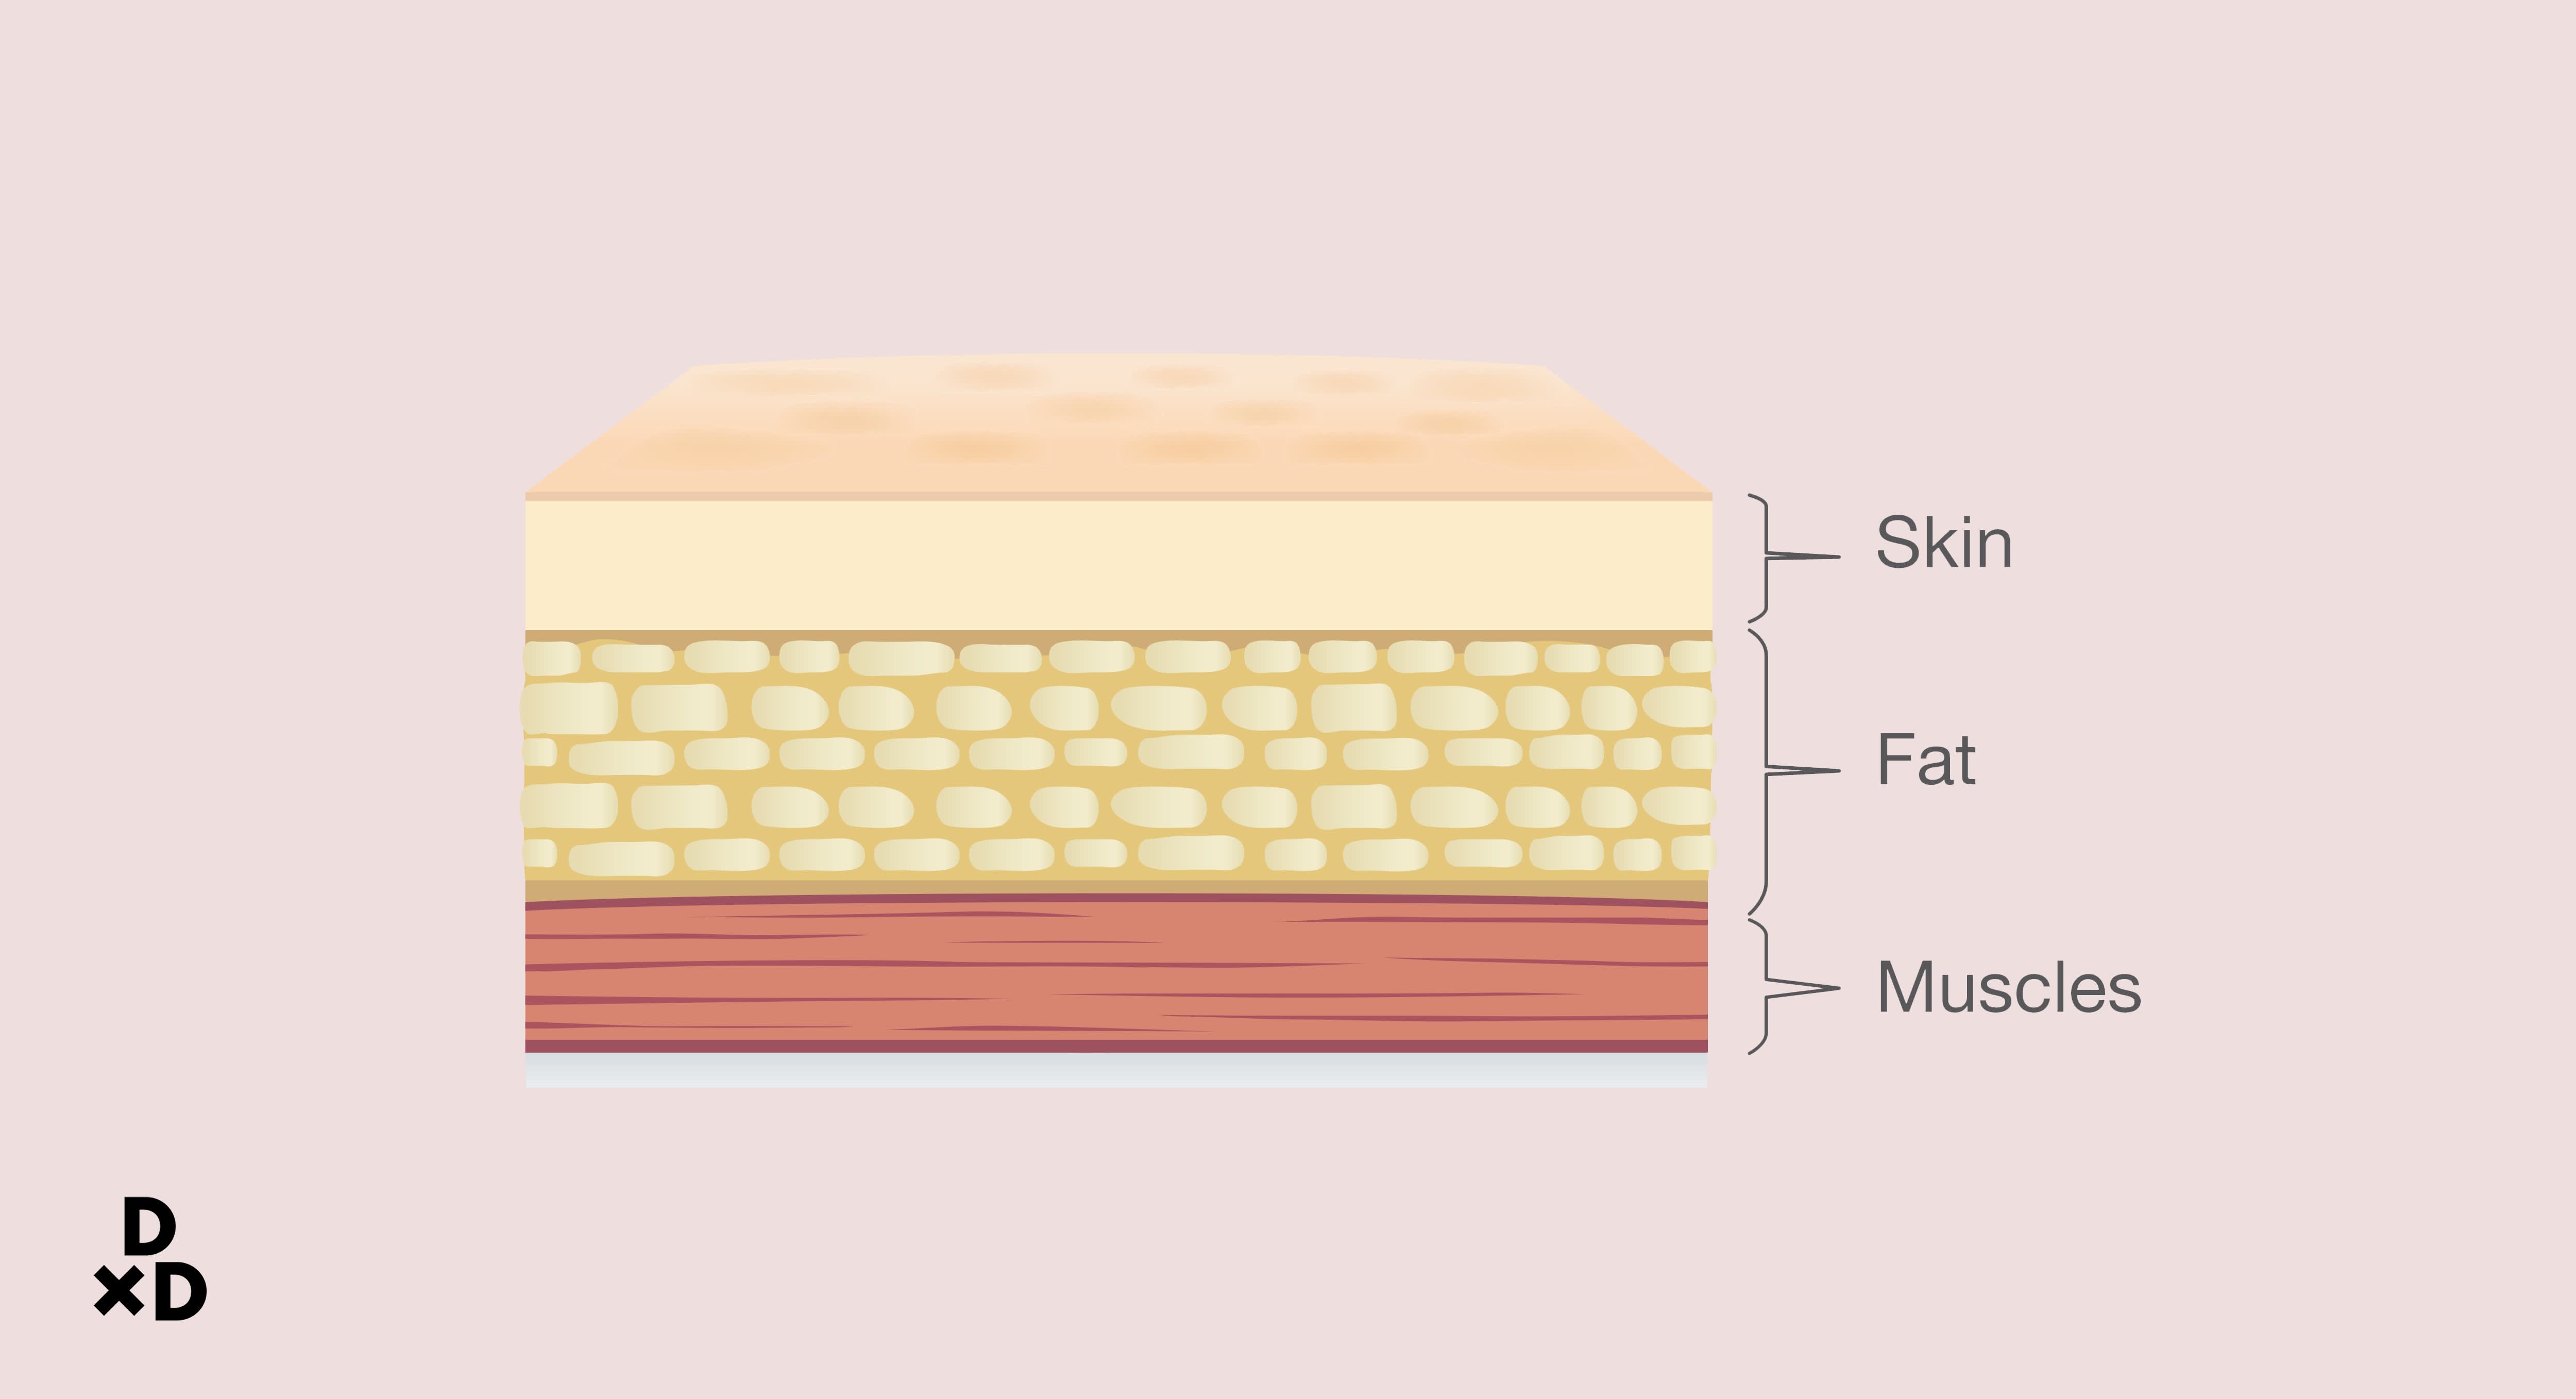 Layer of fats in between of skin and muscles